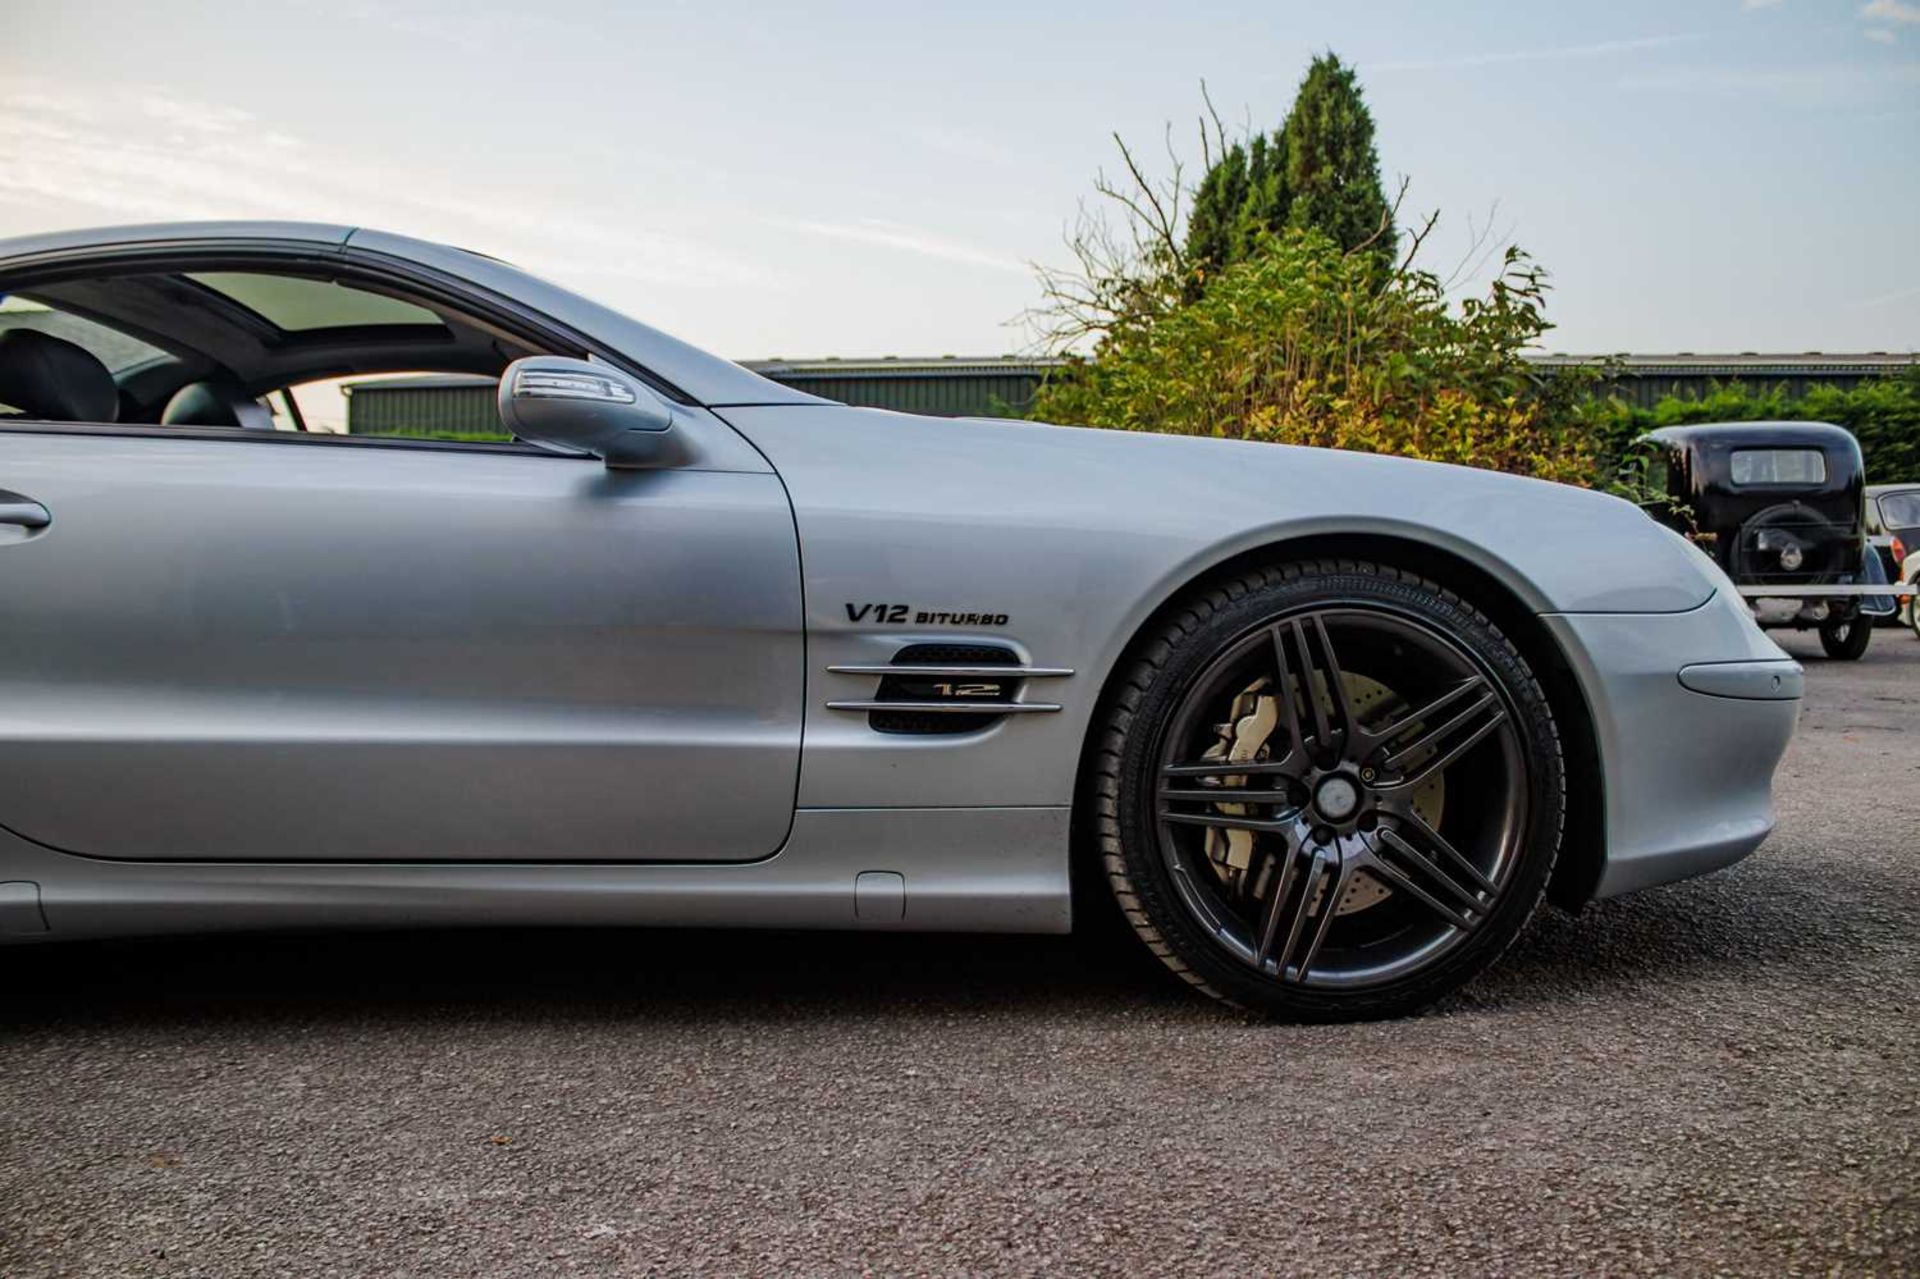 2004 Mercedes SL600 Flagship, 493bhp twin-turbo powered model  - Image 10 of 42